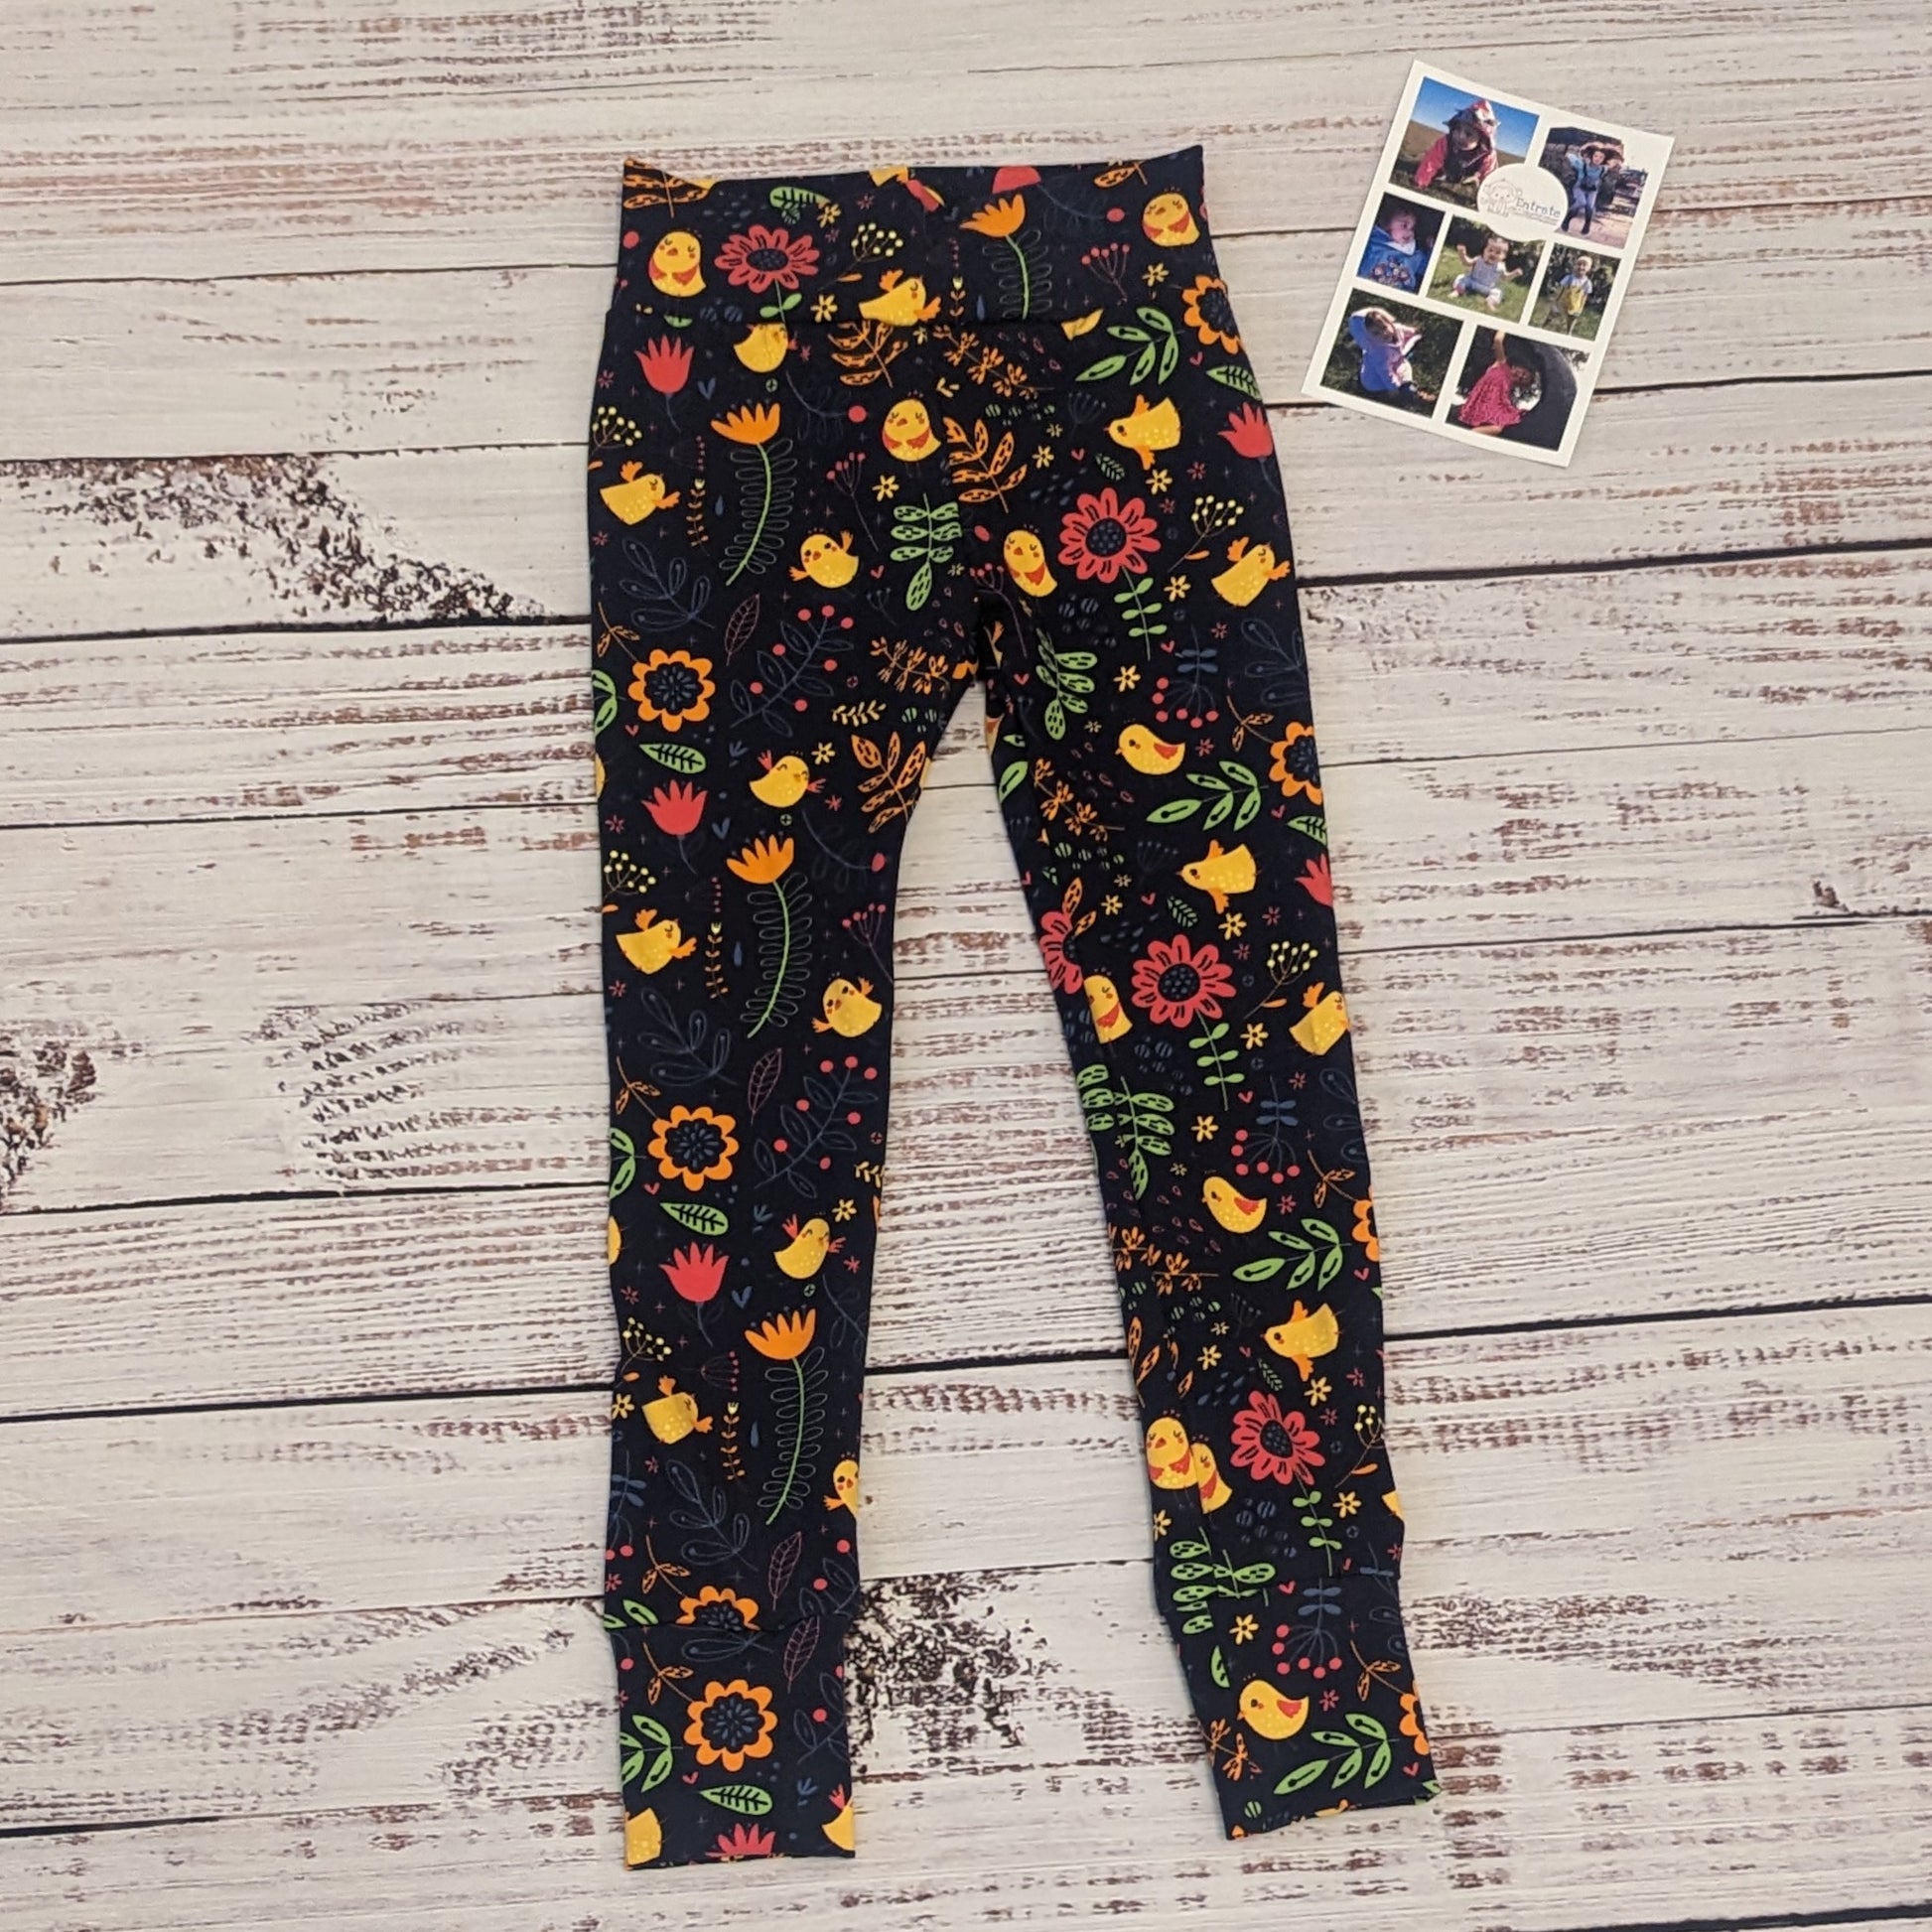 The vibrant and fun flowery chicks leggings. Handmade using soft and stretchy navy chicks cotton jersey. Shown from the front.